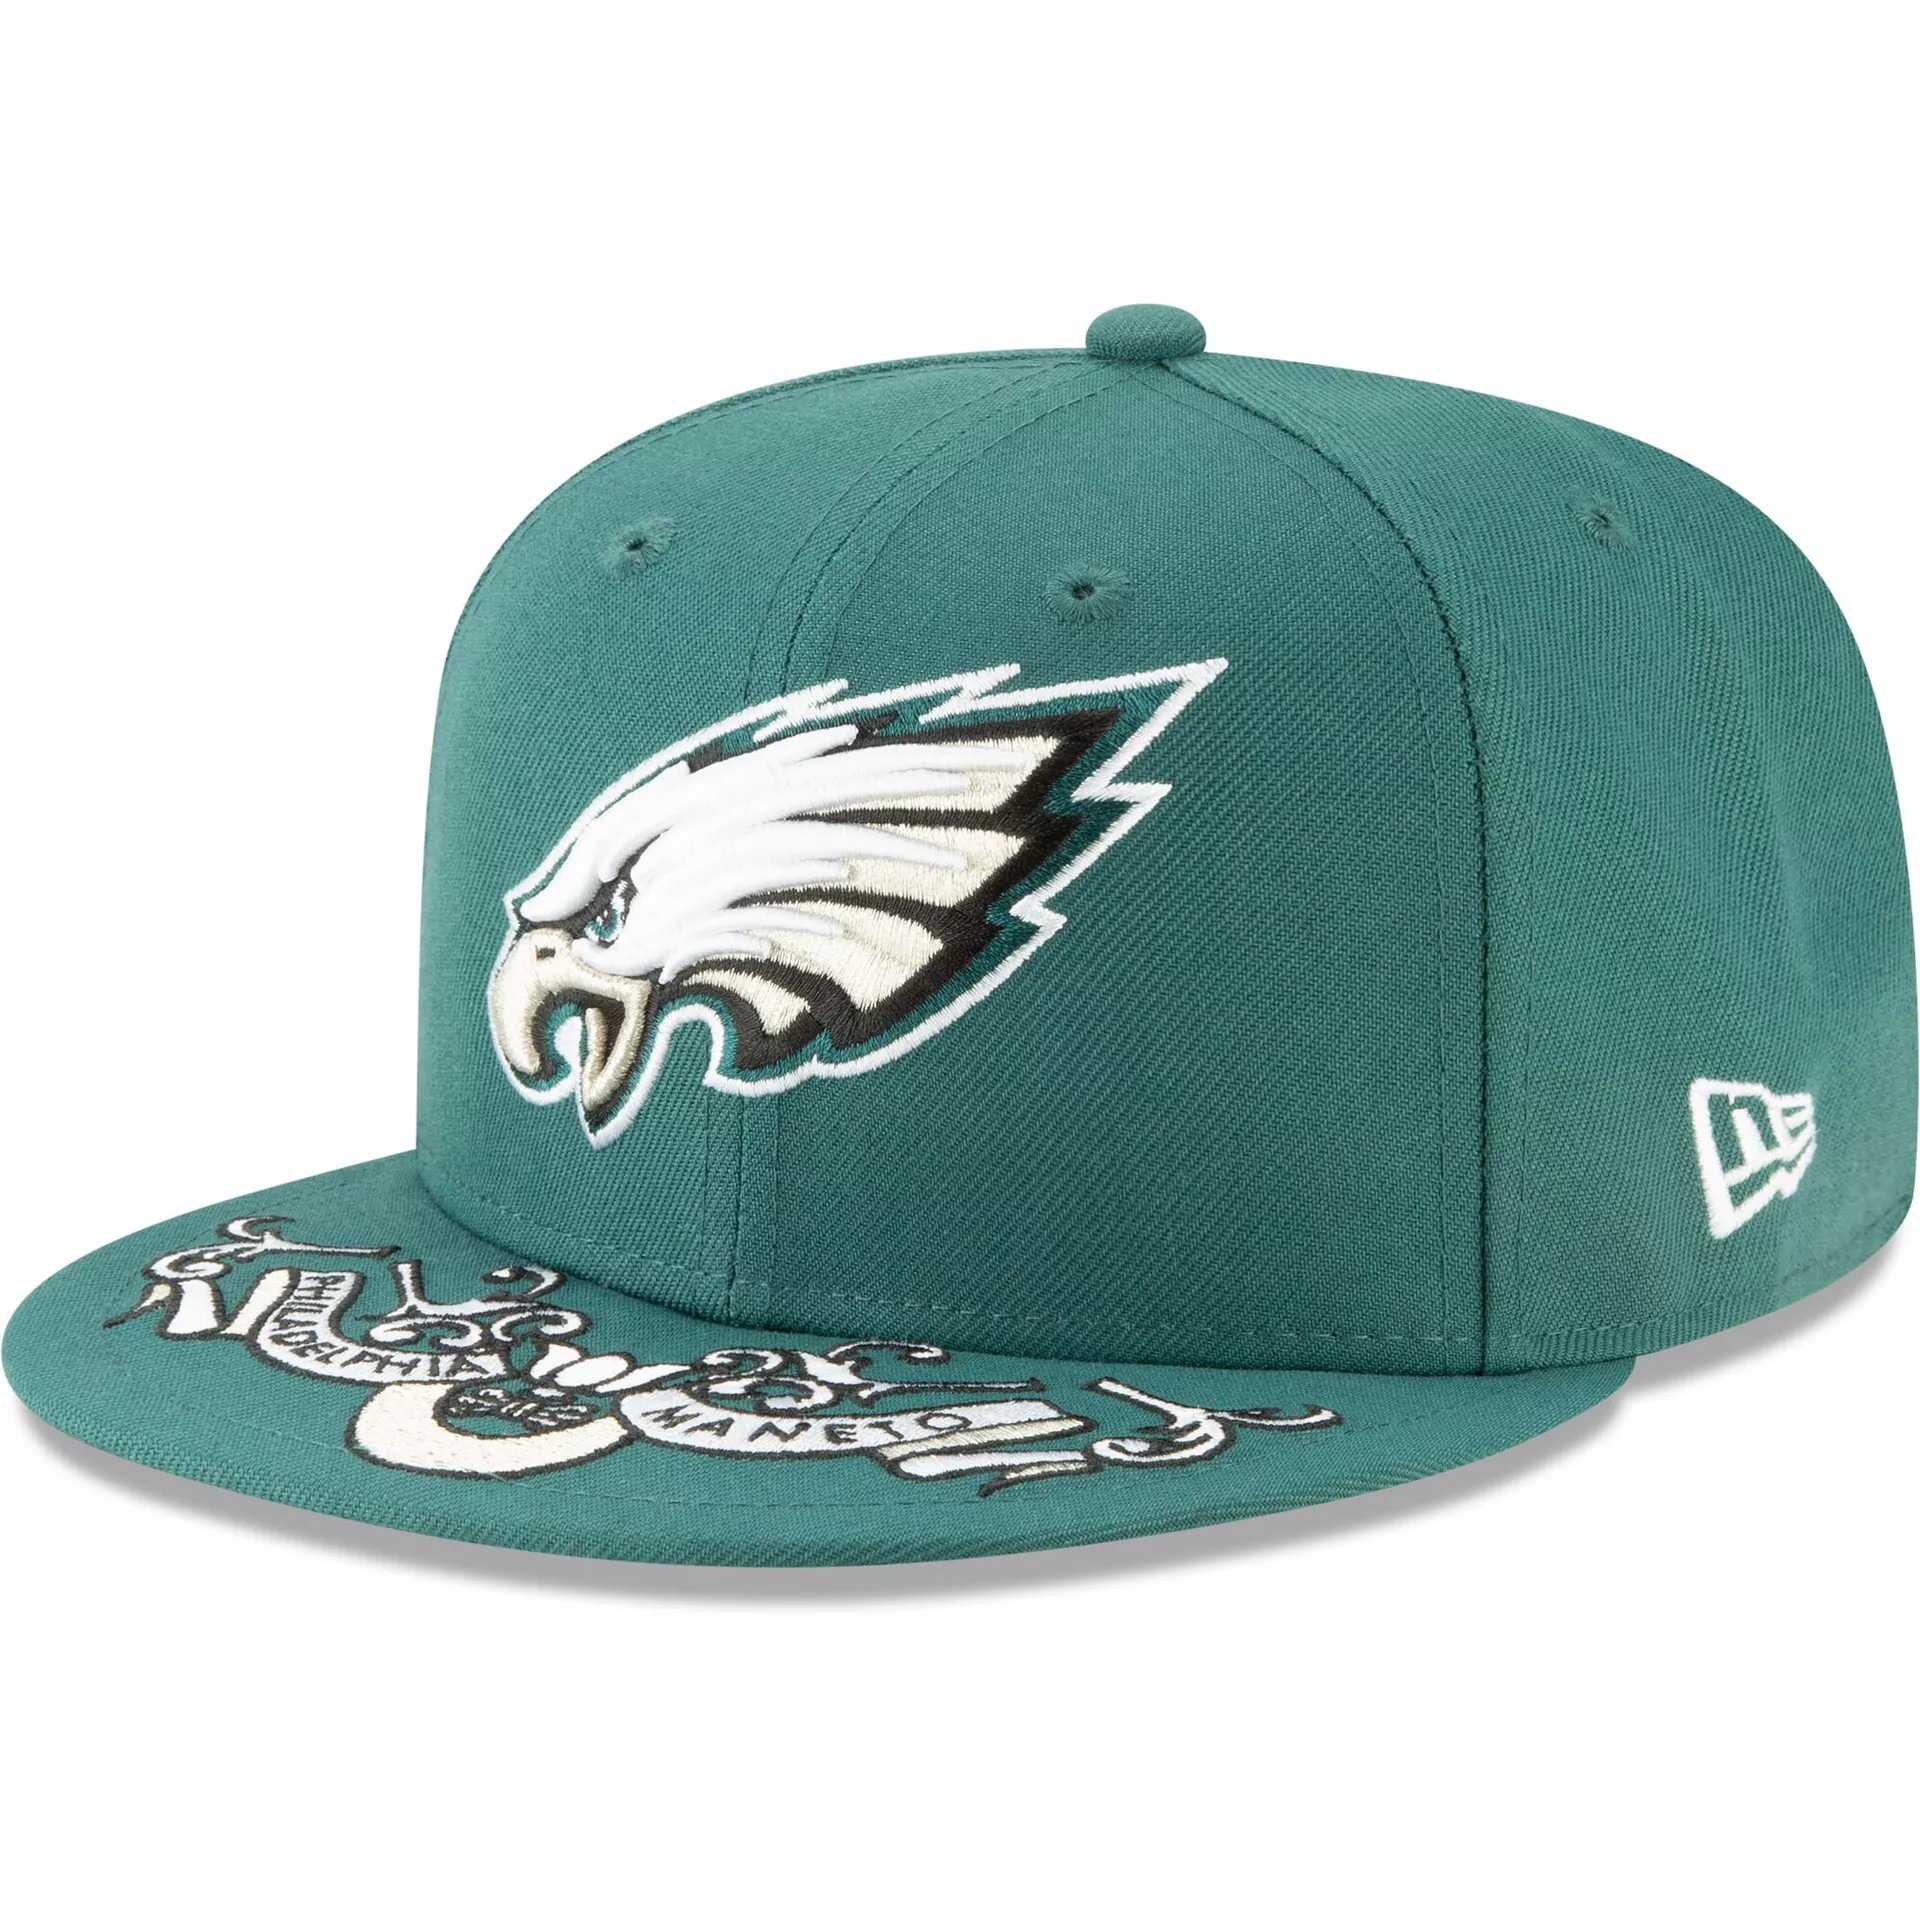 Eagles 2019 NFL Draft hats are here